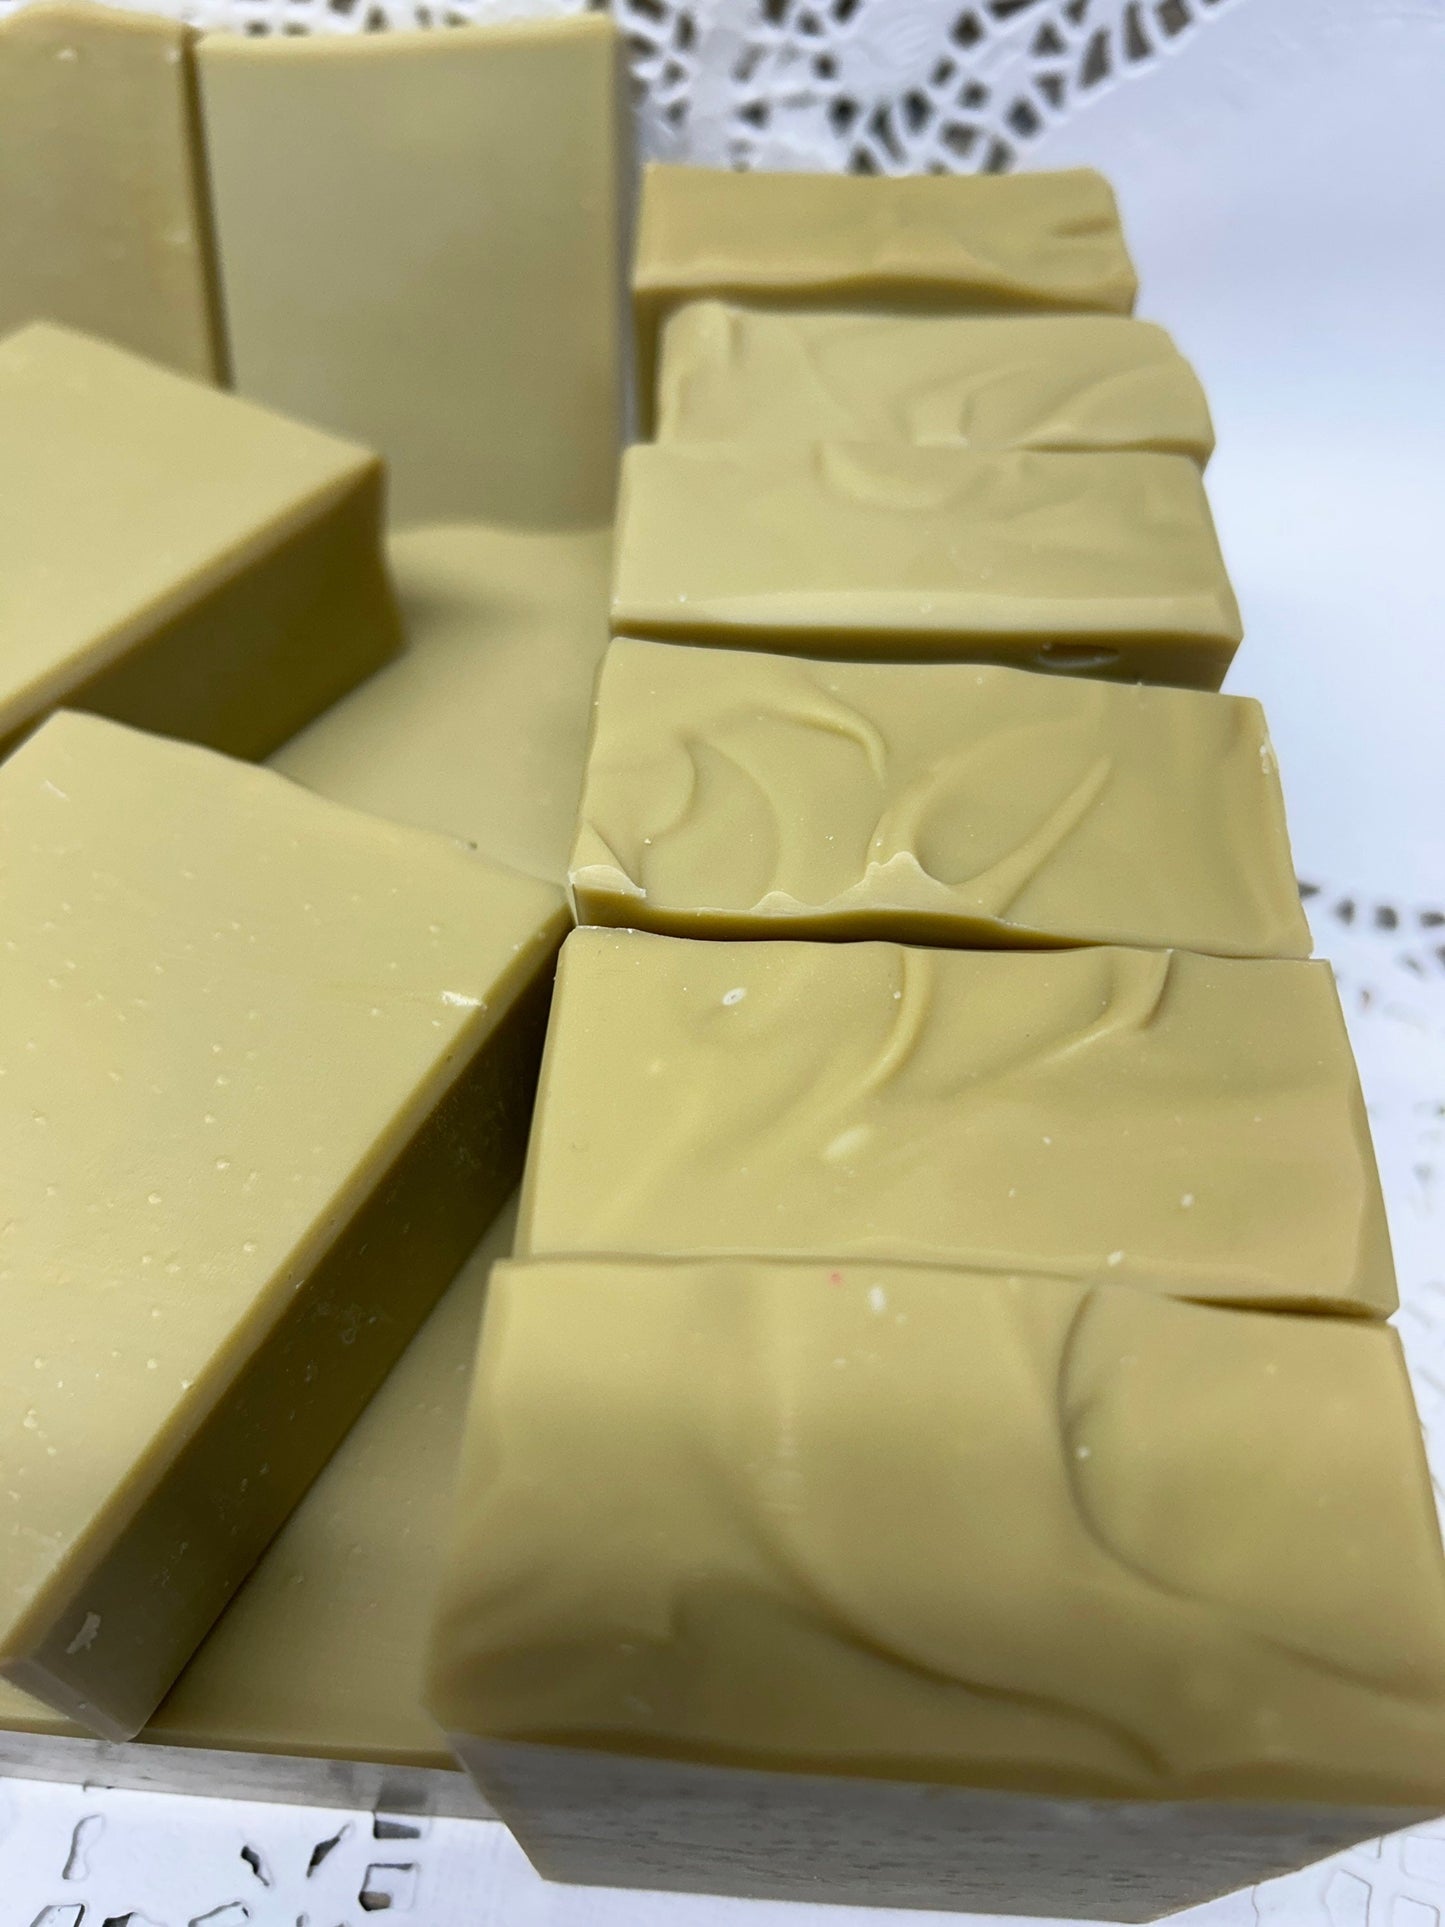 Aleppo Soap made with Laurel Fruit Oil at 40% and Extra Virgin Olive Oil, so smooth and creamy